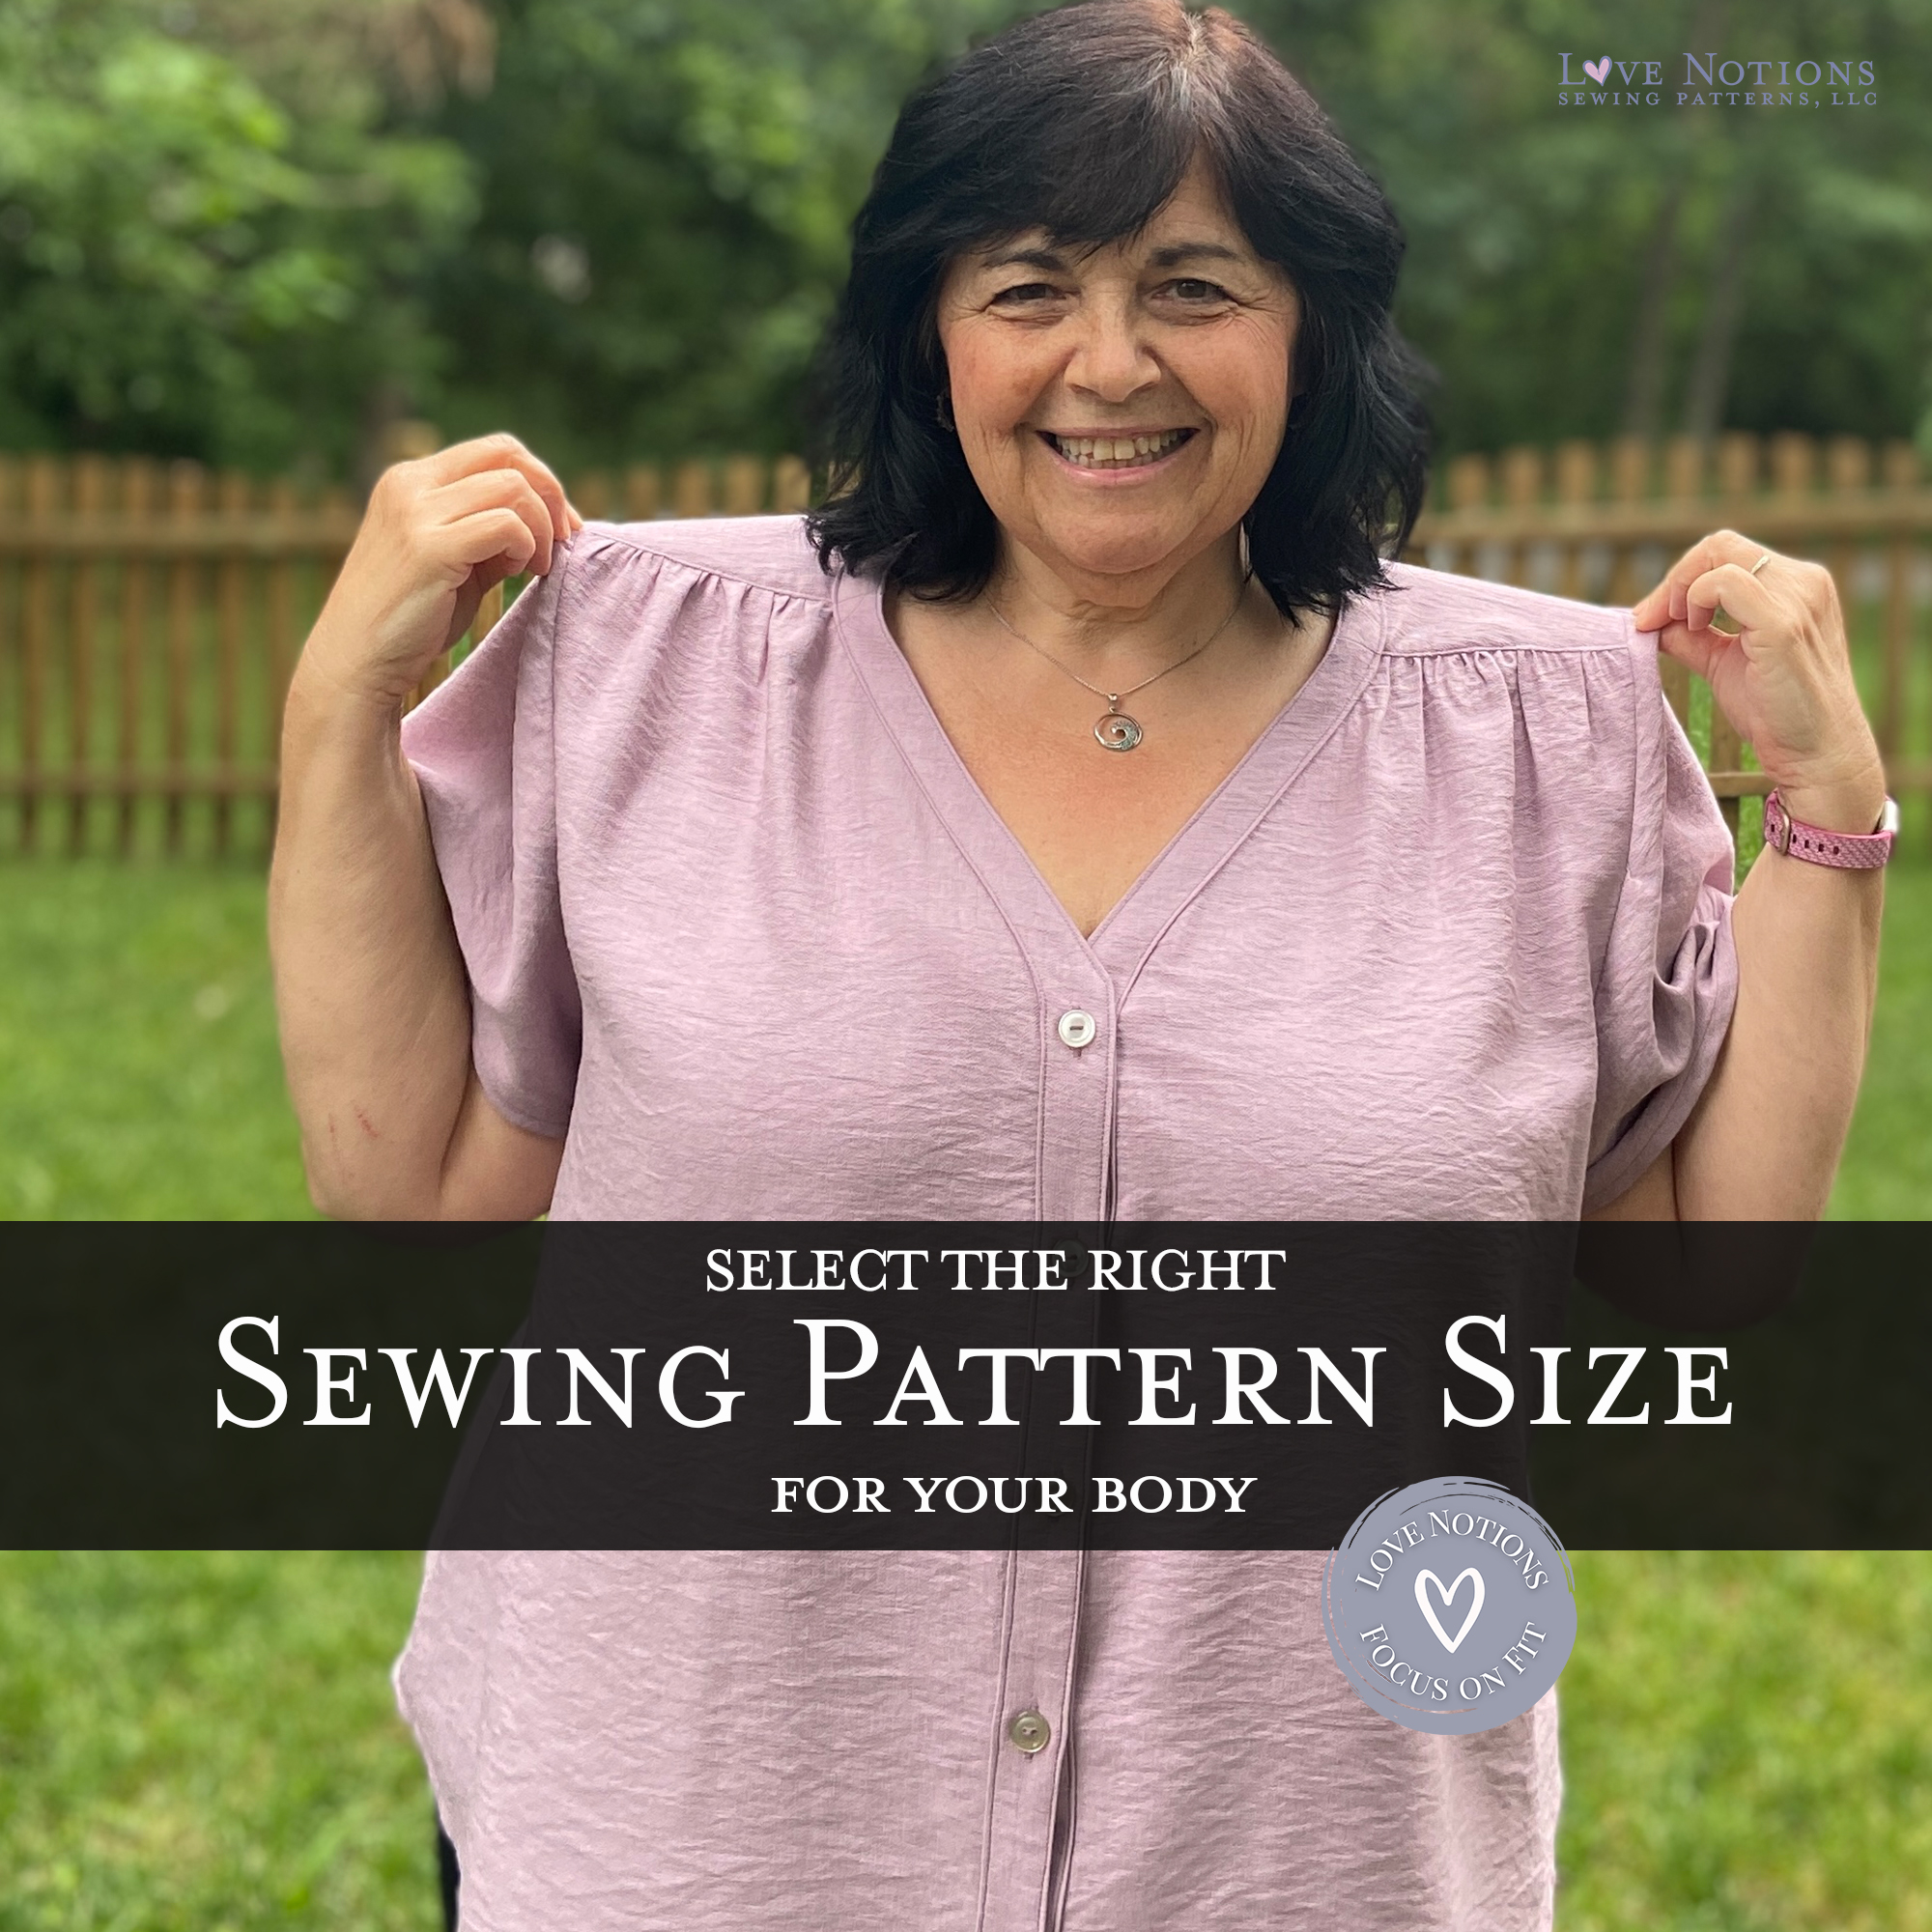 Feature Friday Archives - Love Notions Sewing Patterns